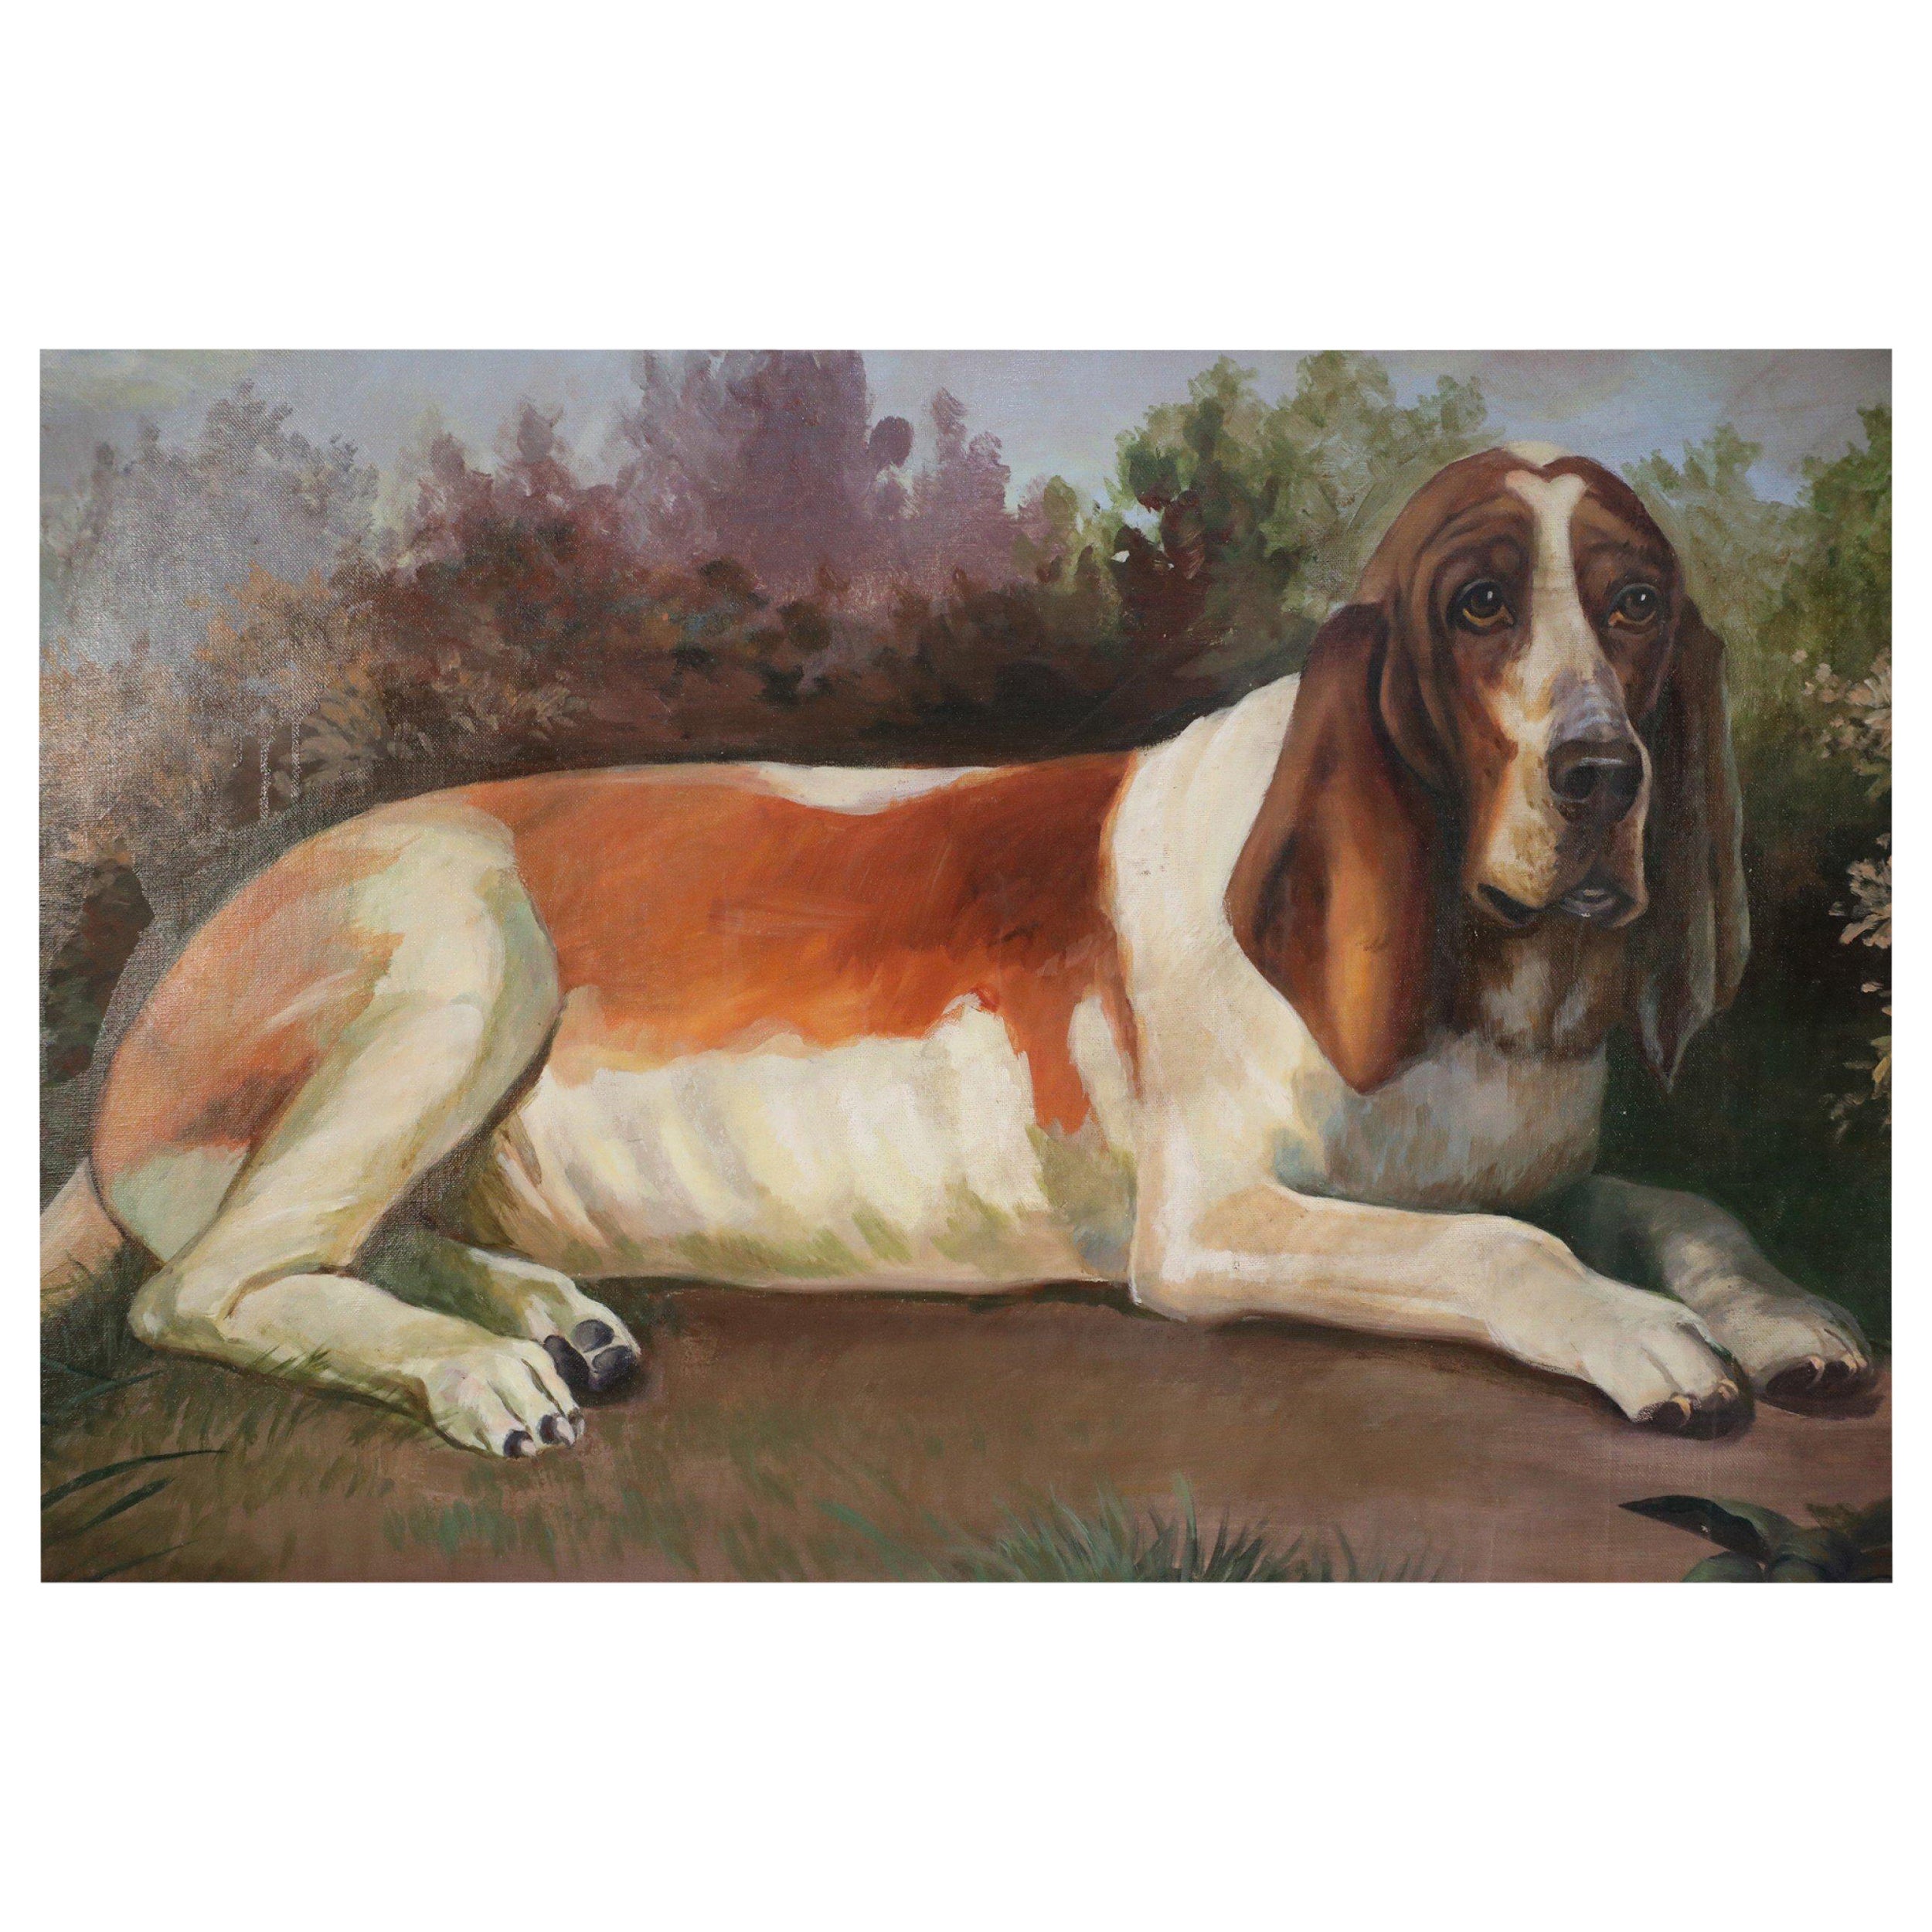 Vintage (20th Century) portrait of a brown and white basset hound captured on a path amid grasses and autumnal plants and trees, on a large rectangular unframed canvas.
 